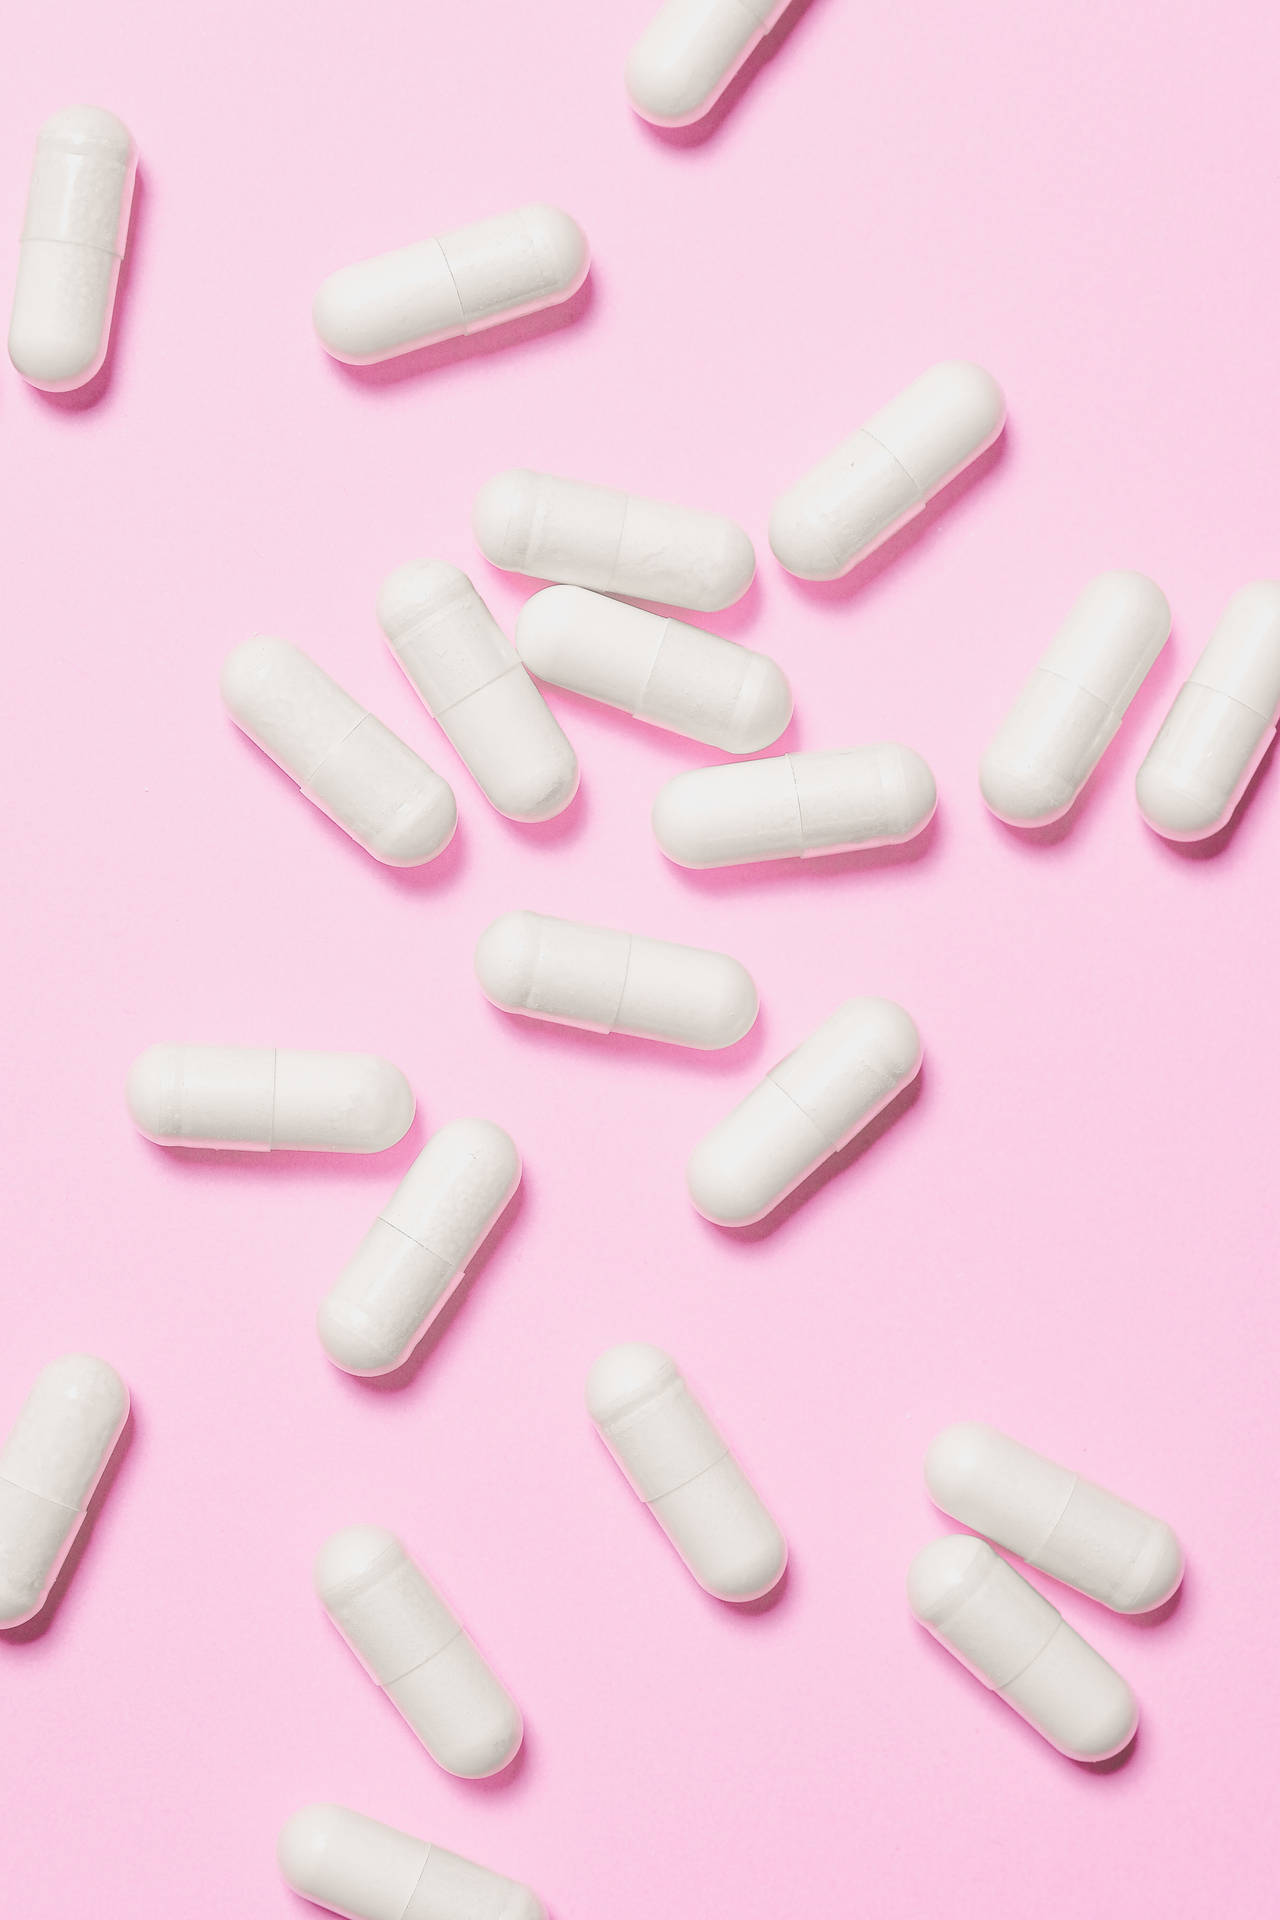 White Capsules On Pink Background